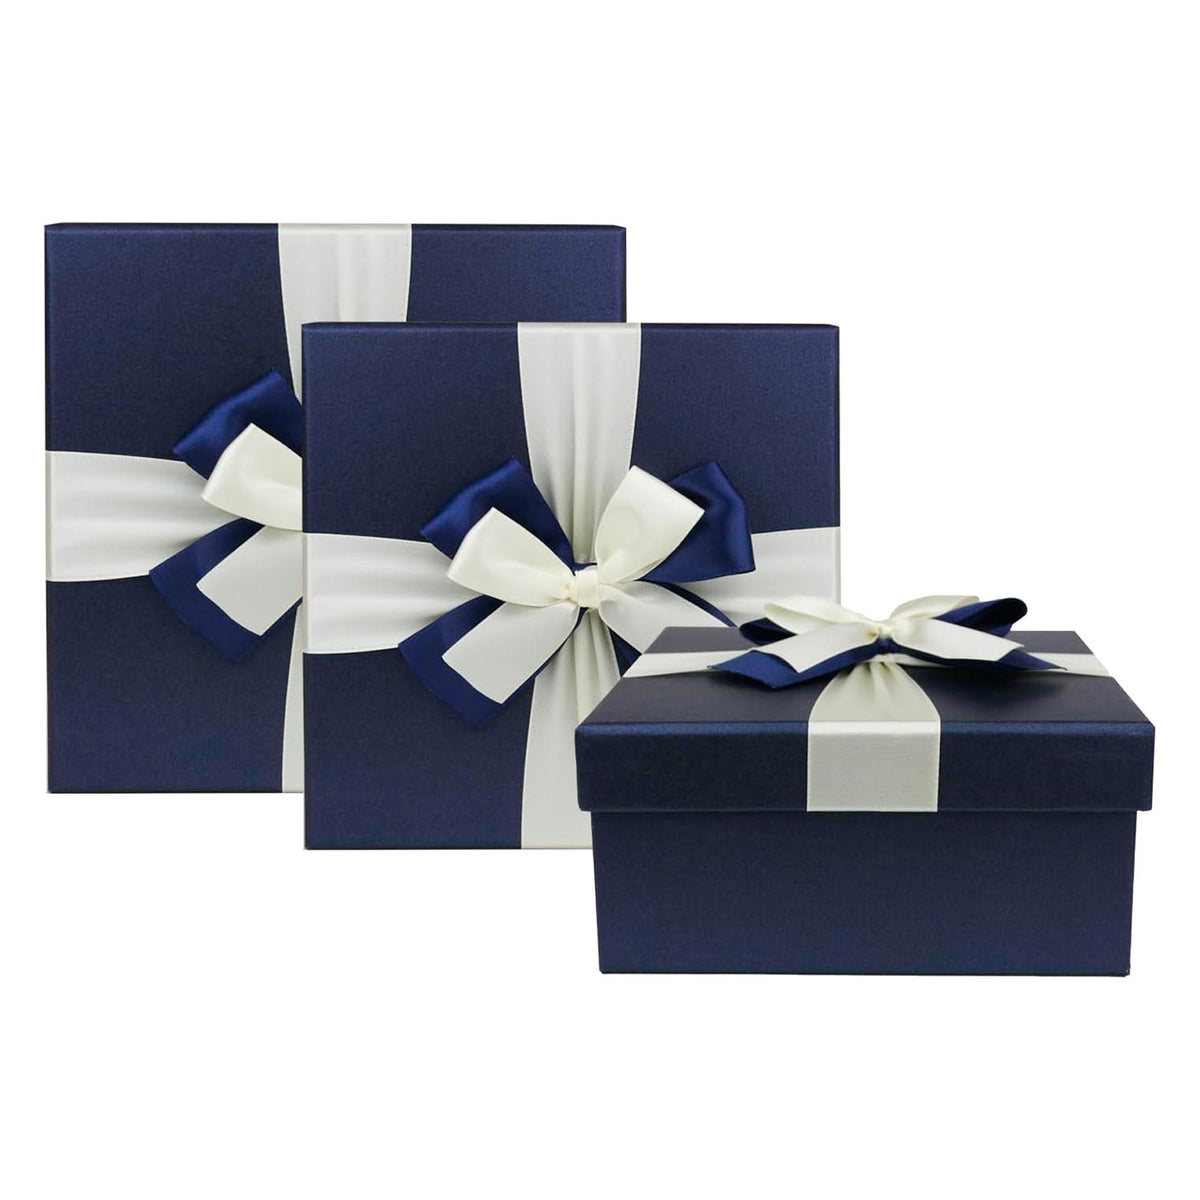 Set of 3 Square Blue Gift Boxes With White Satin Ribbon